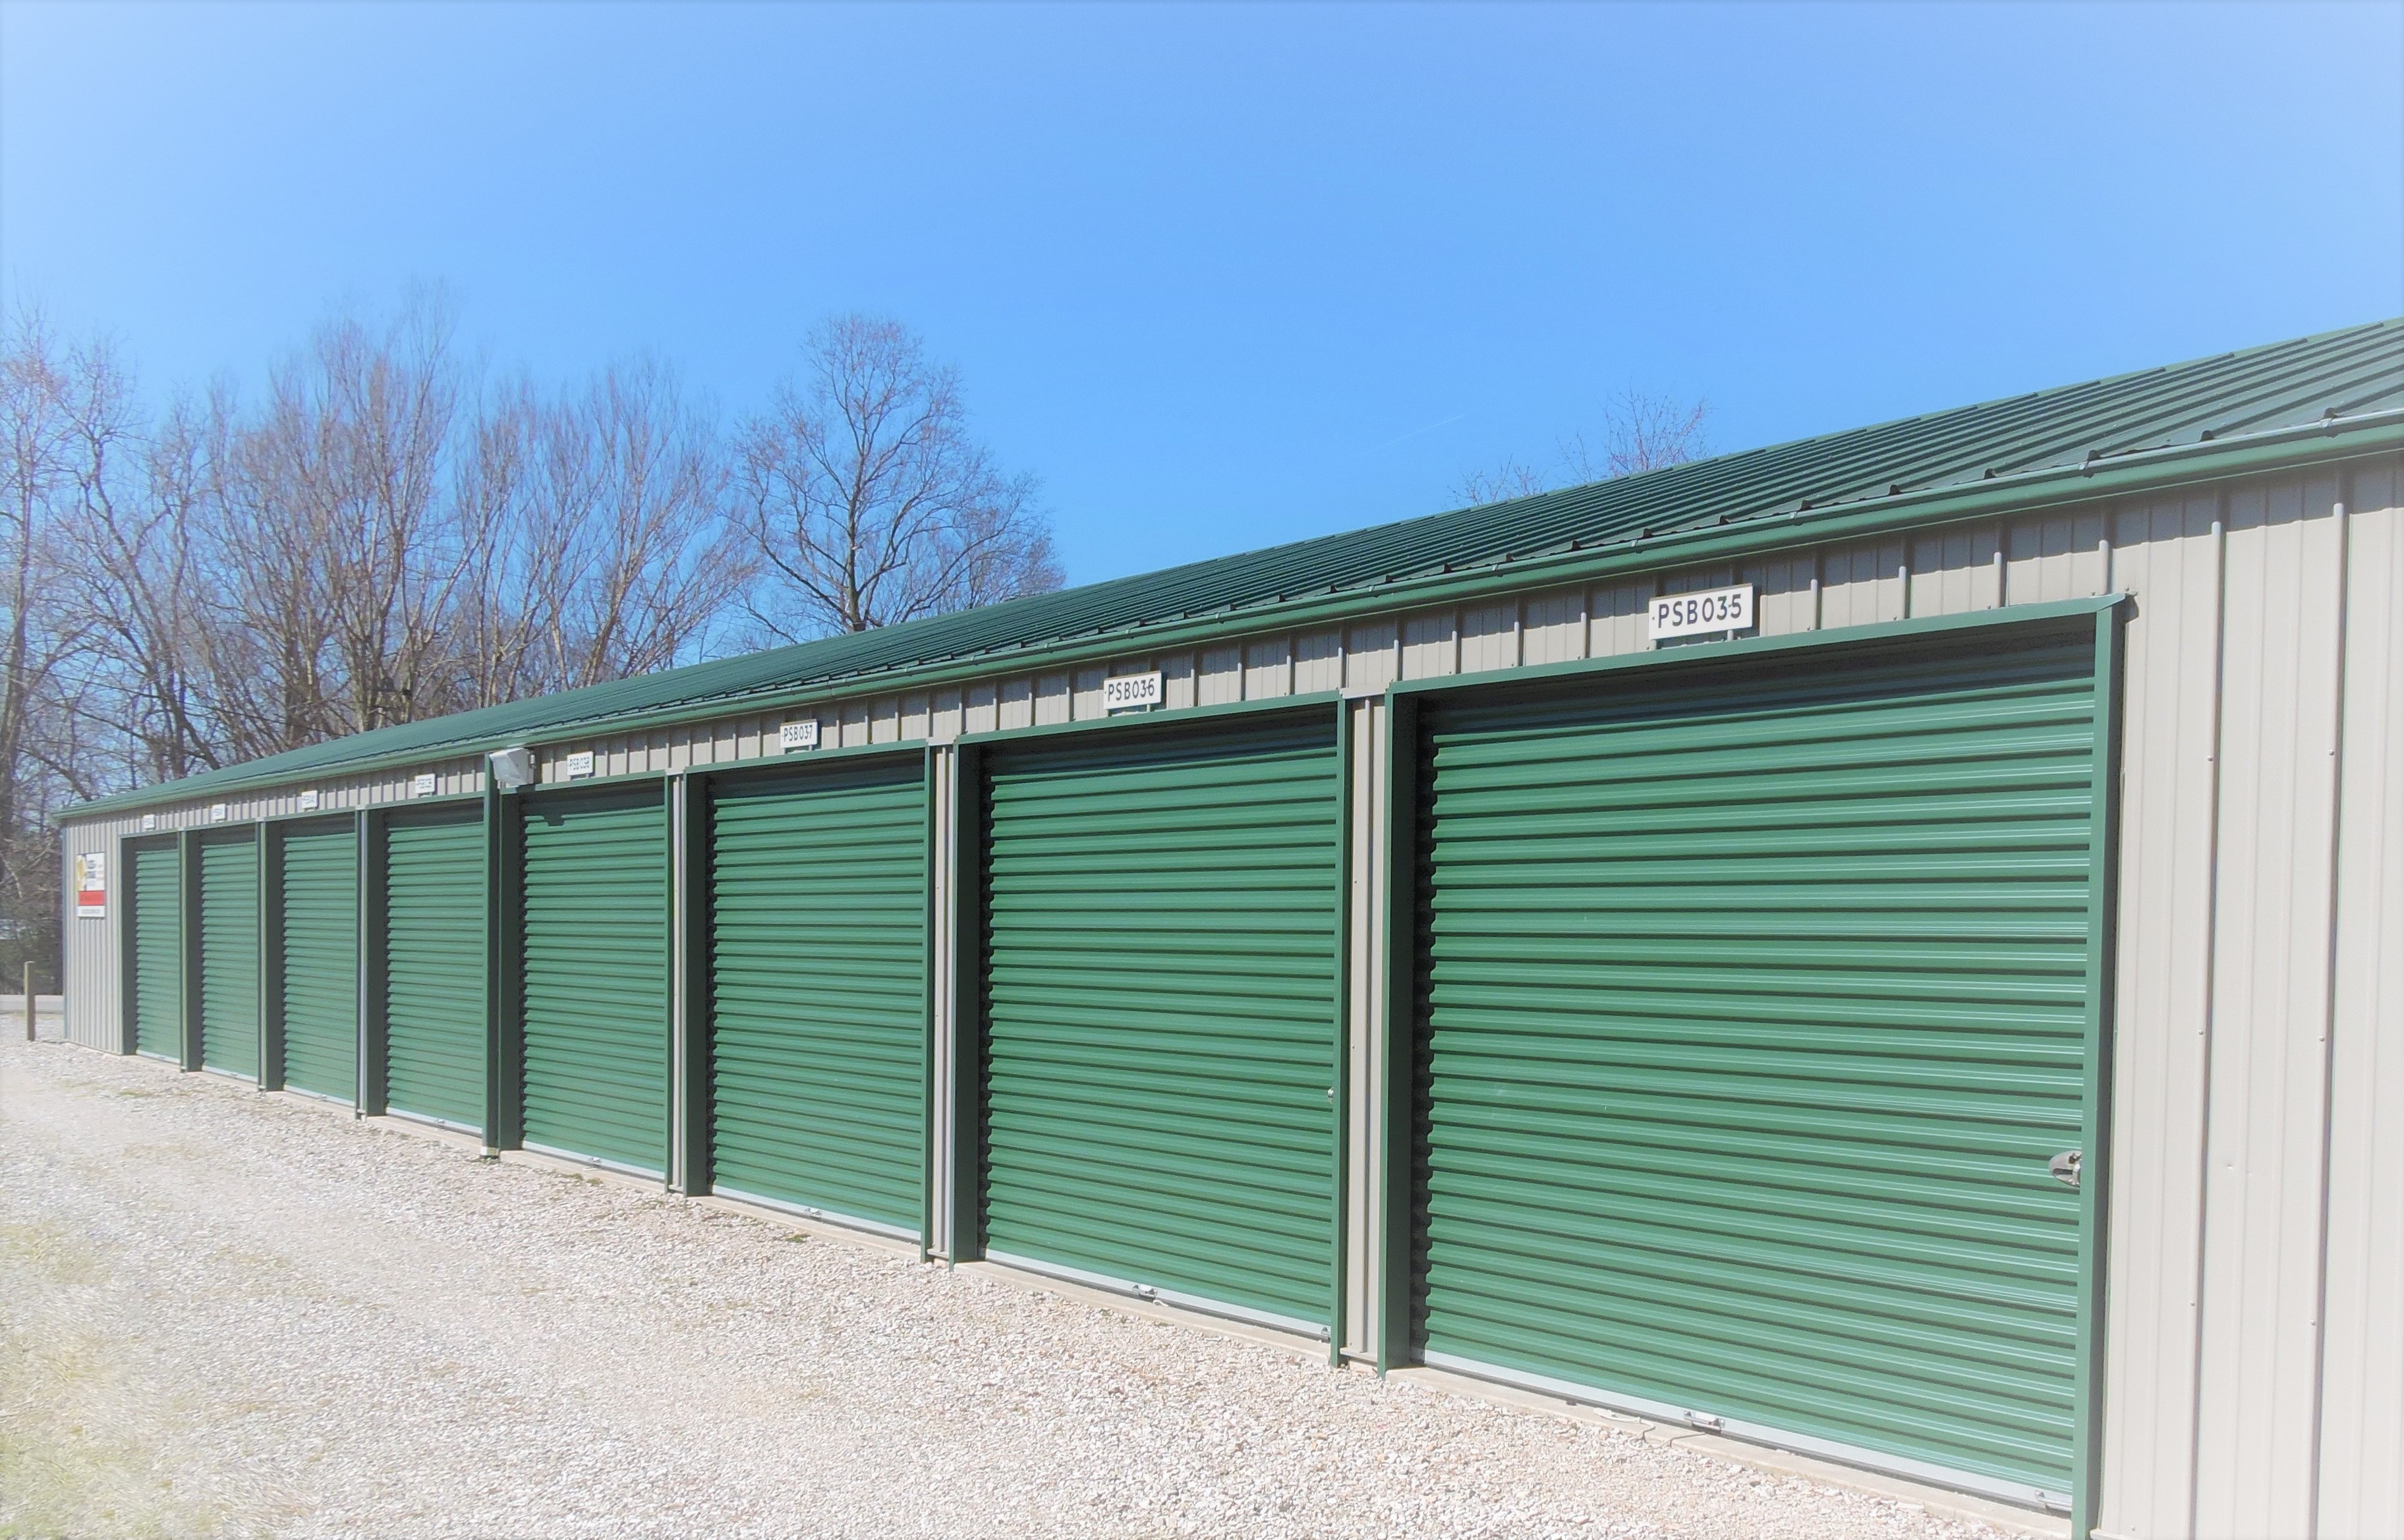 Green roll-up doors at Birdseye Access Storage Now, featuring drive-up units, 24/7 access, and online bill pay options."